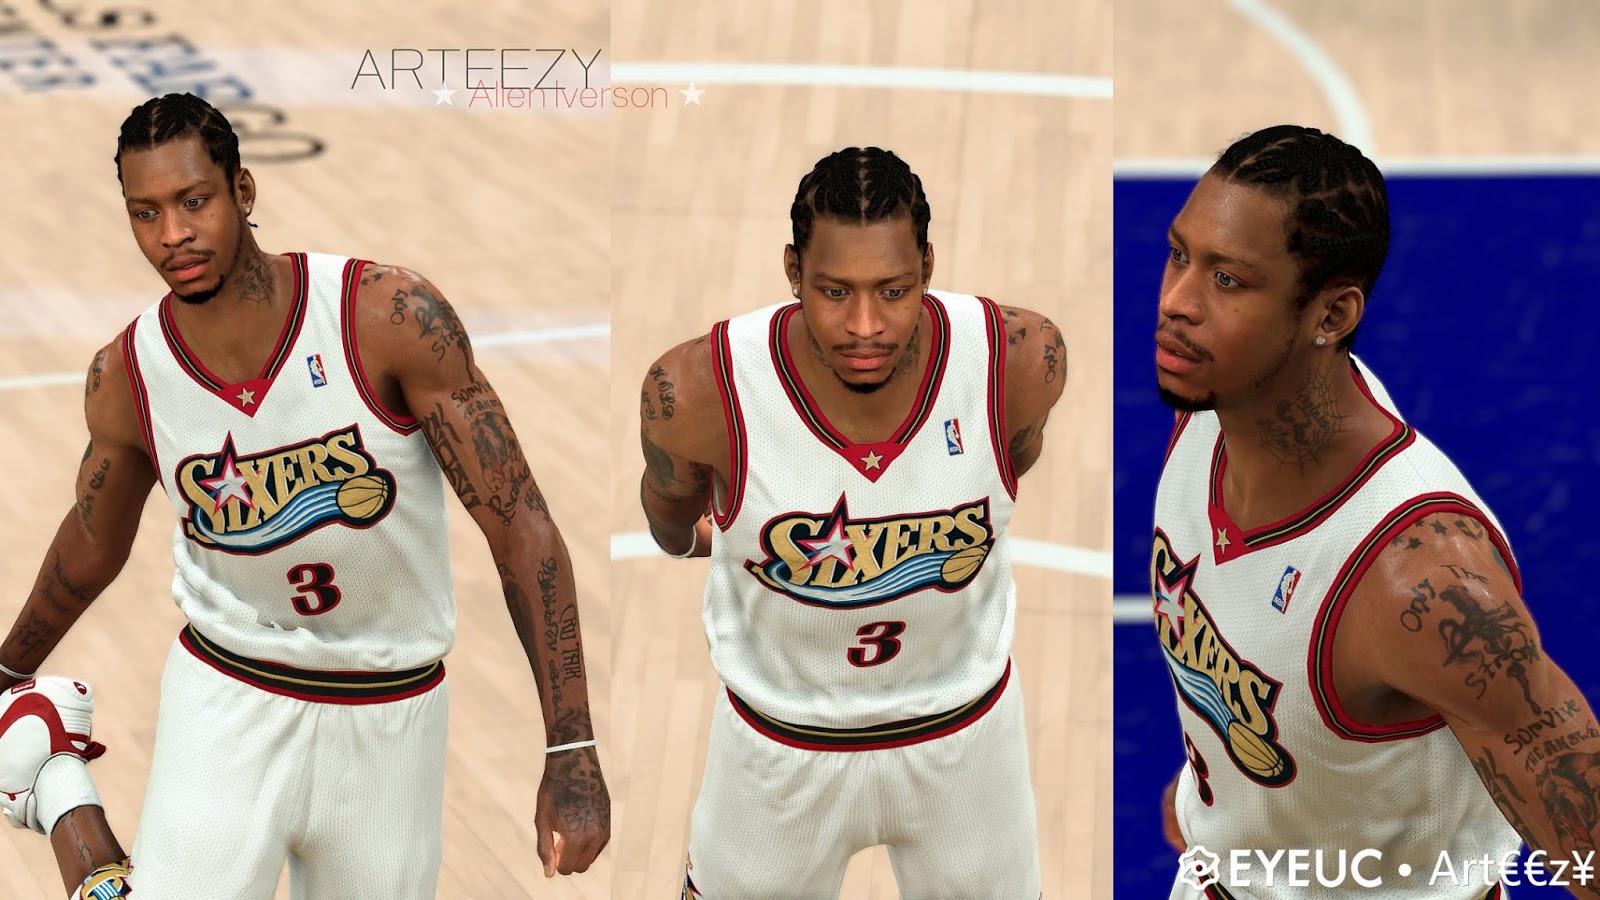 Download Allen Iverson Hd Face And Body Model By Arteezy For 2k20 Nba 2k Updates Roster Update Cyberface Etc PSD Mockup Templates